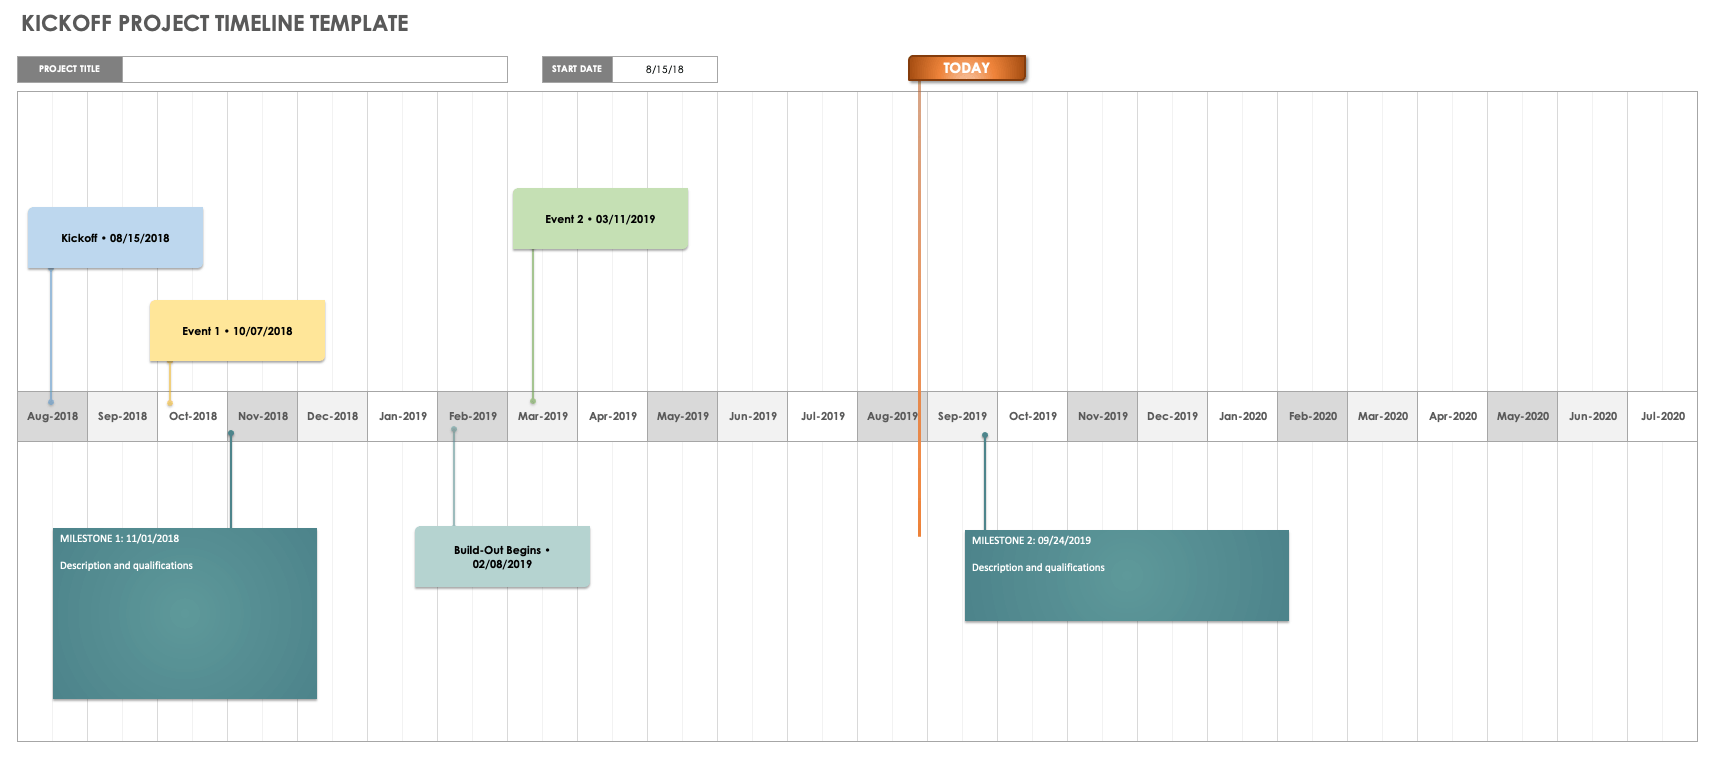 Kickoff Project Timeline Template